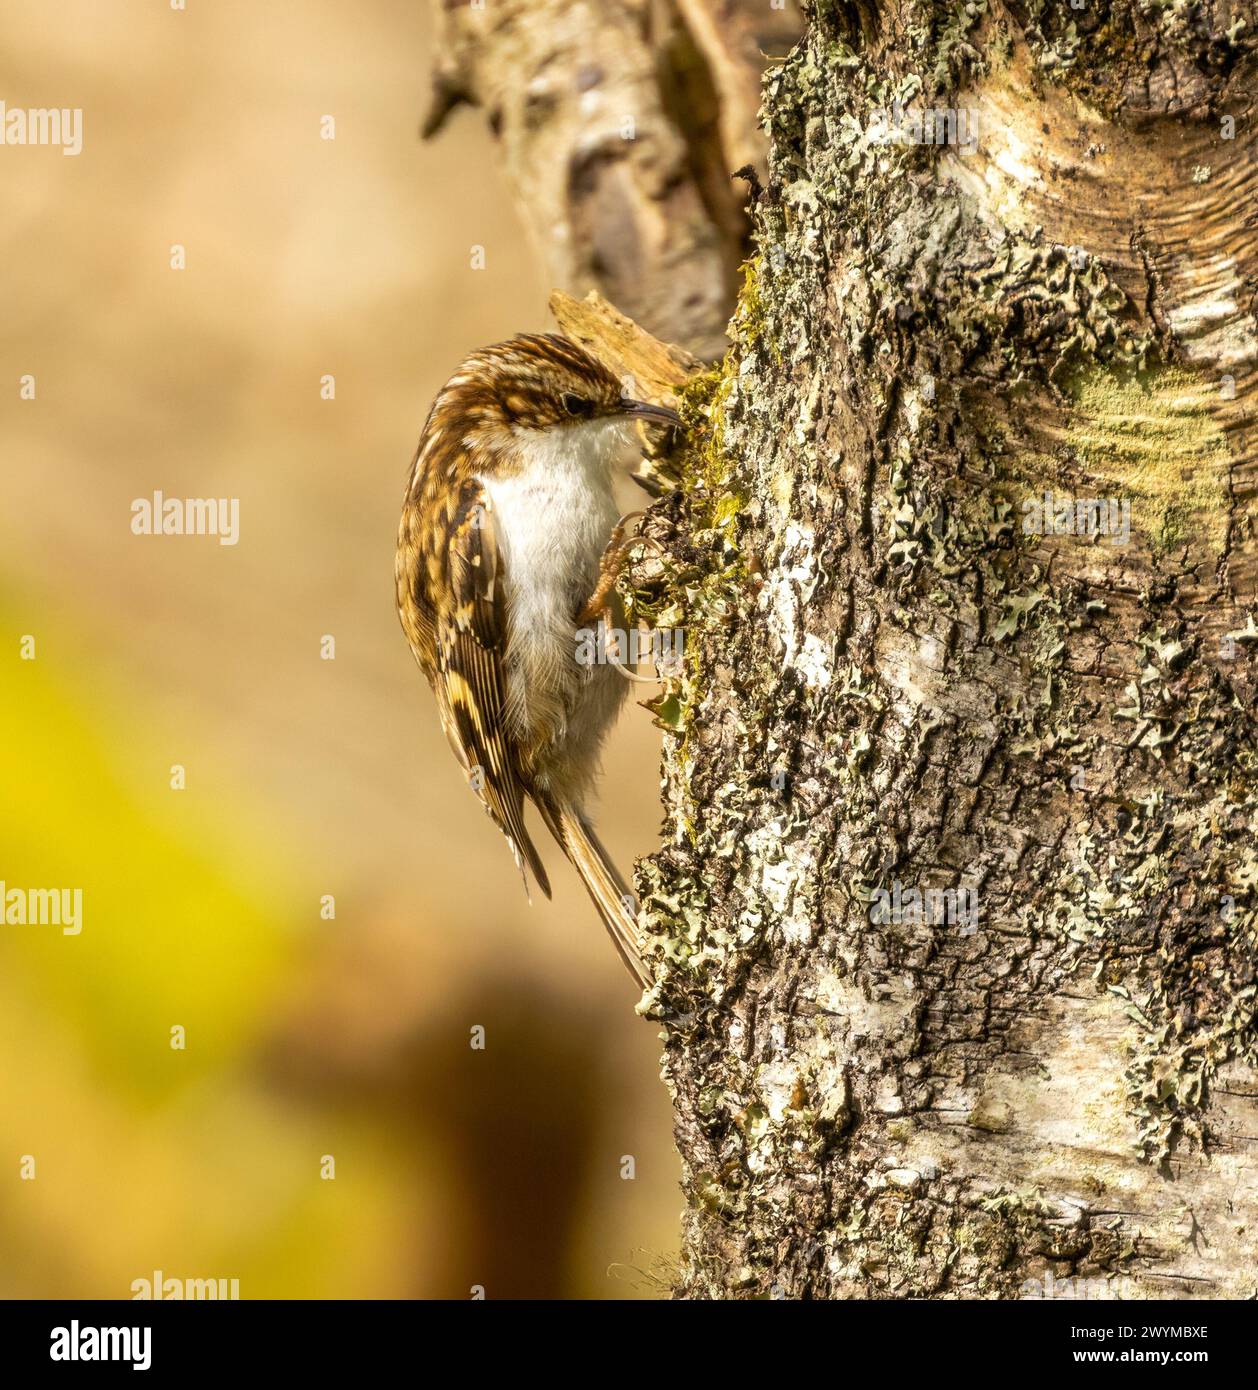 Tree creeper bird busily searching for food in the bark of a tree trunk Stock Photo